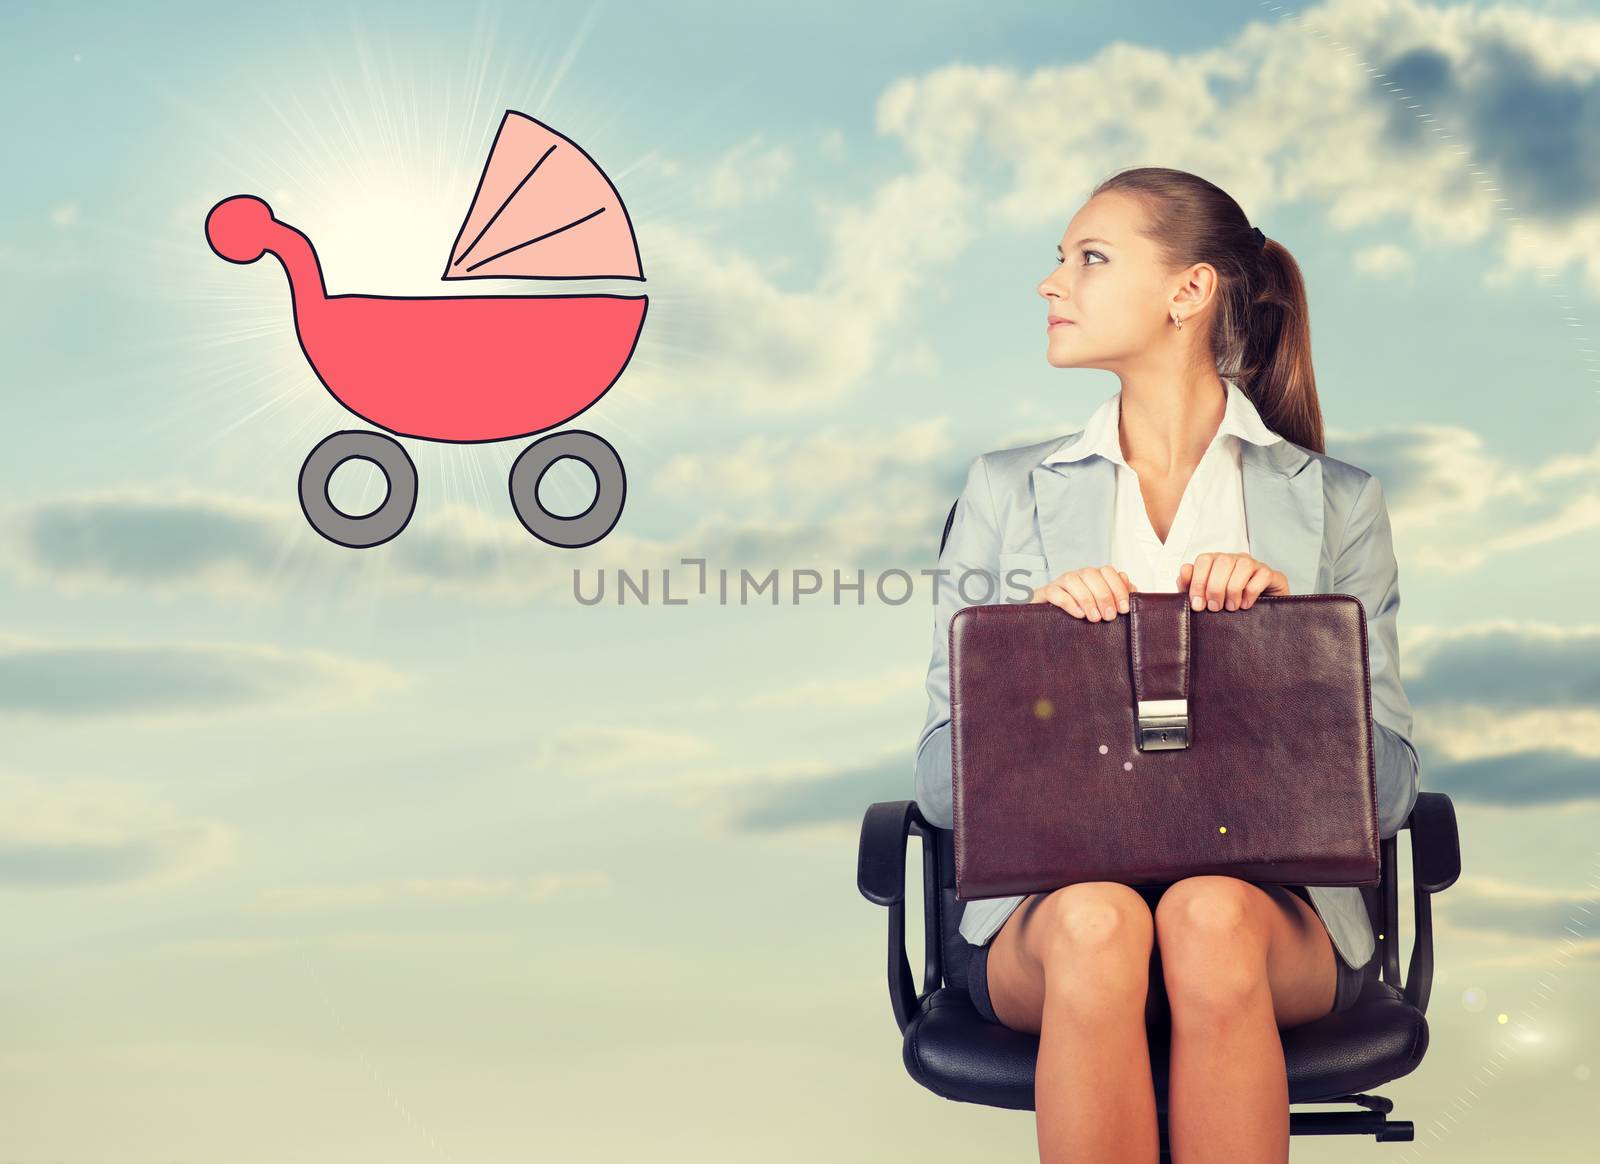 Business woman in skirt, blouse and jacket, sitting on chair and holding briefcase imagines buggy. Against background of sky and clouds